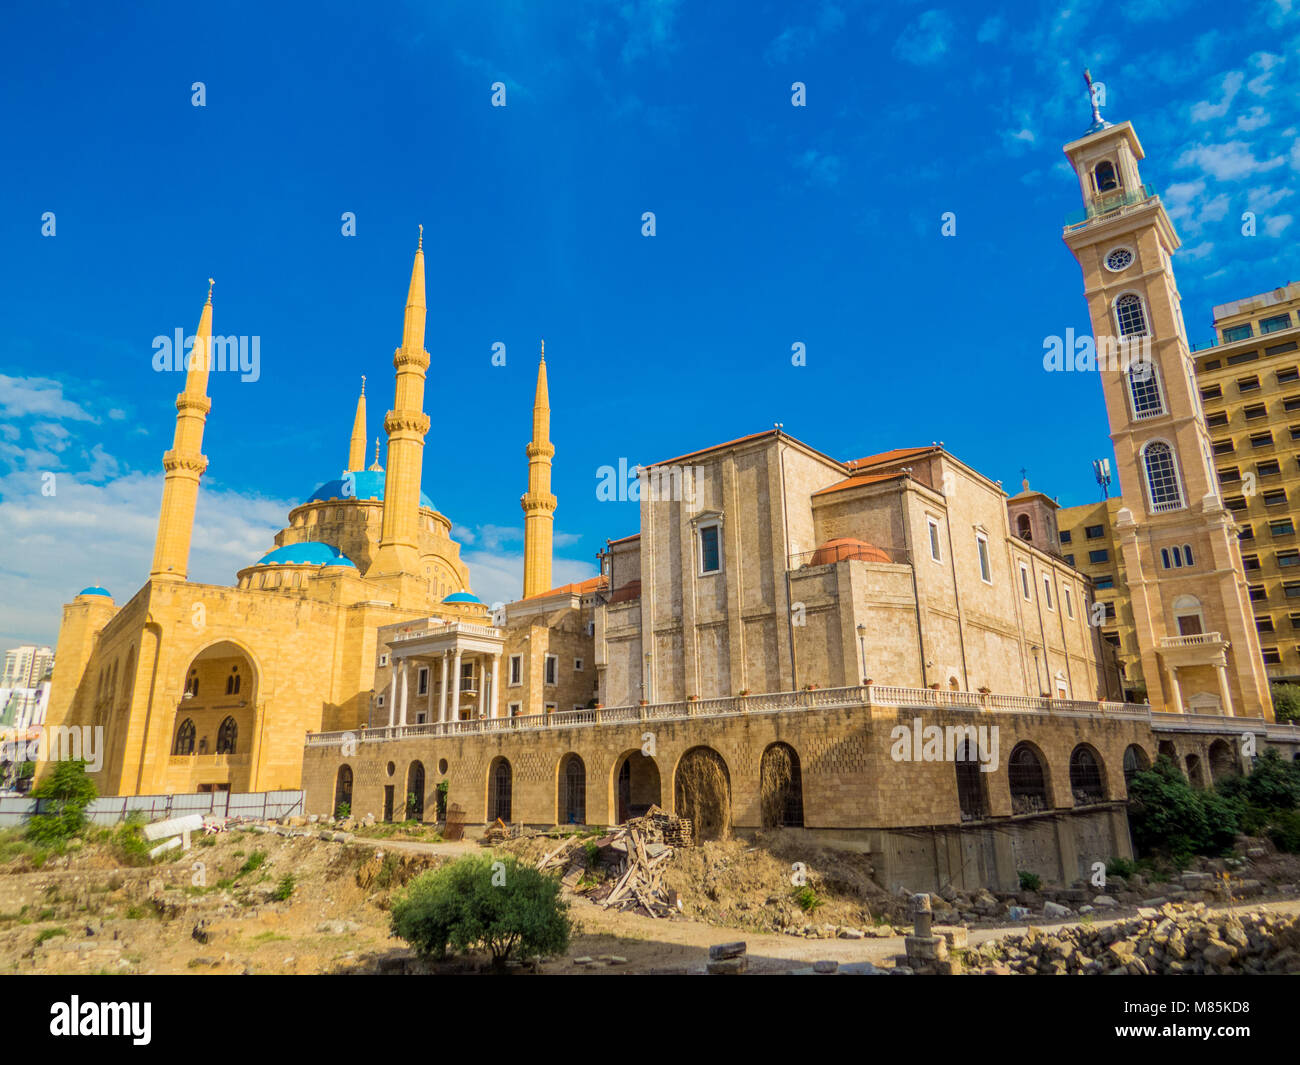 Coexistence of religions in Lebanon - Saint George Maronite Greek Orthodox Cathedral and the Mohammad Al-Amin Mosque Stock Photo